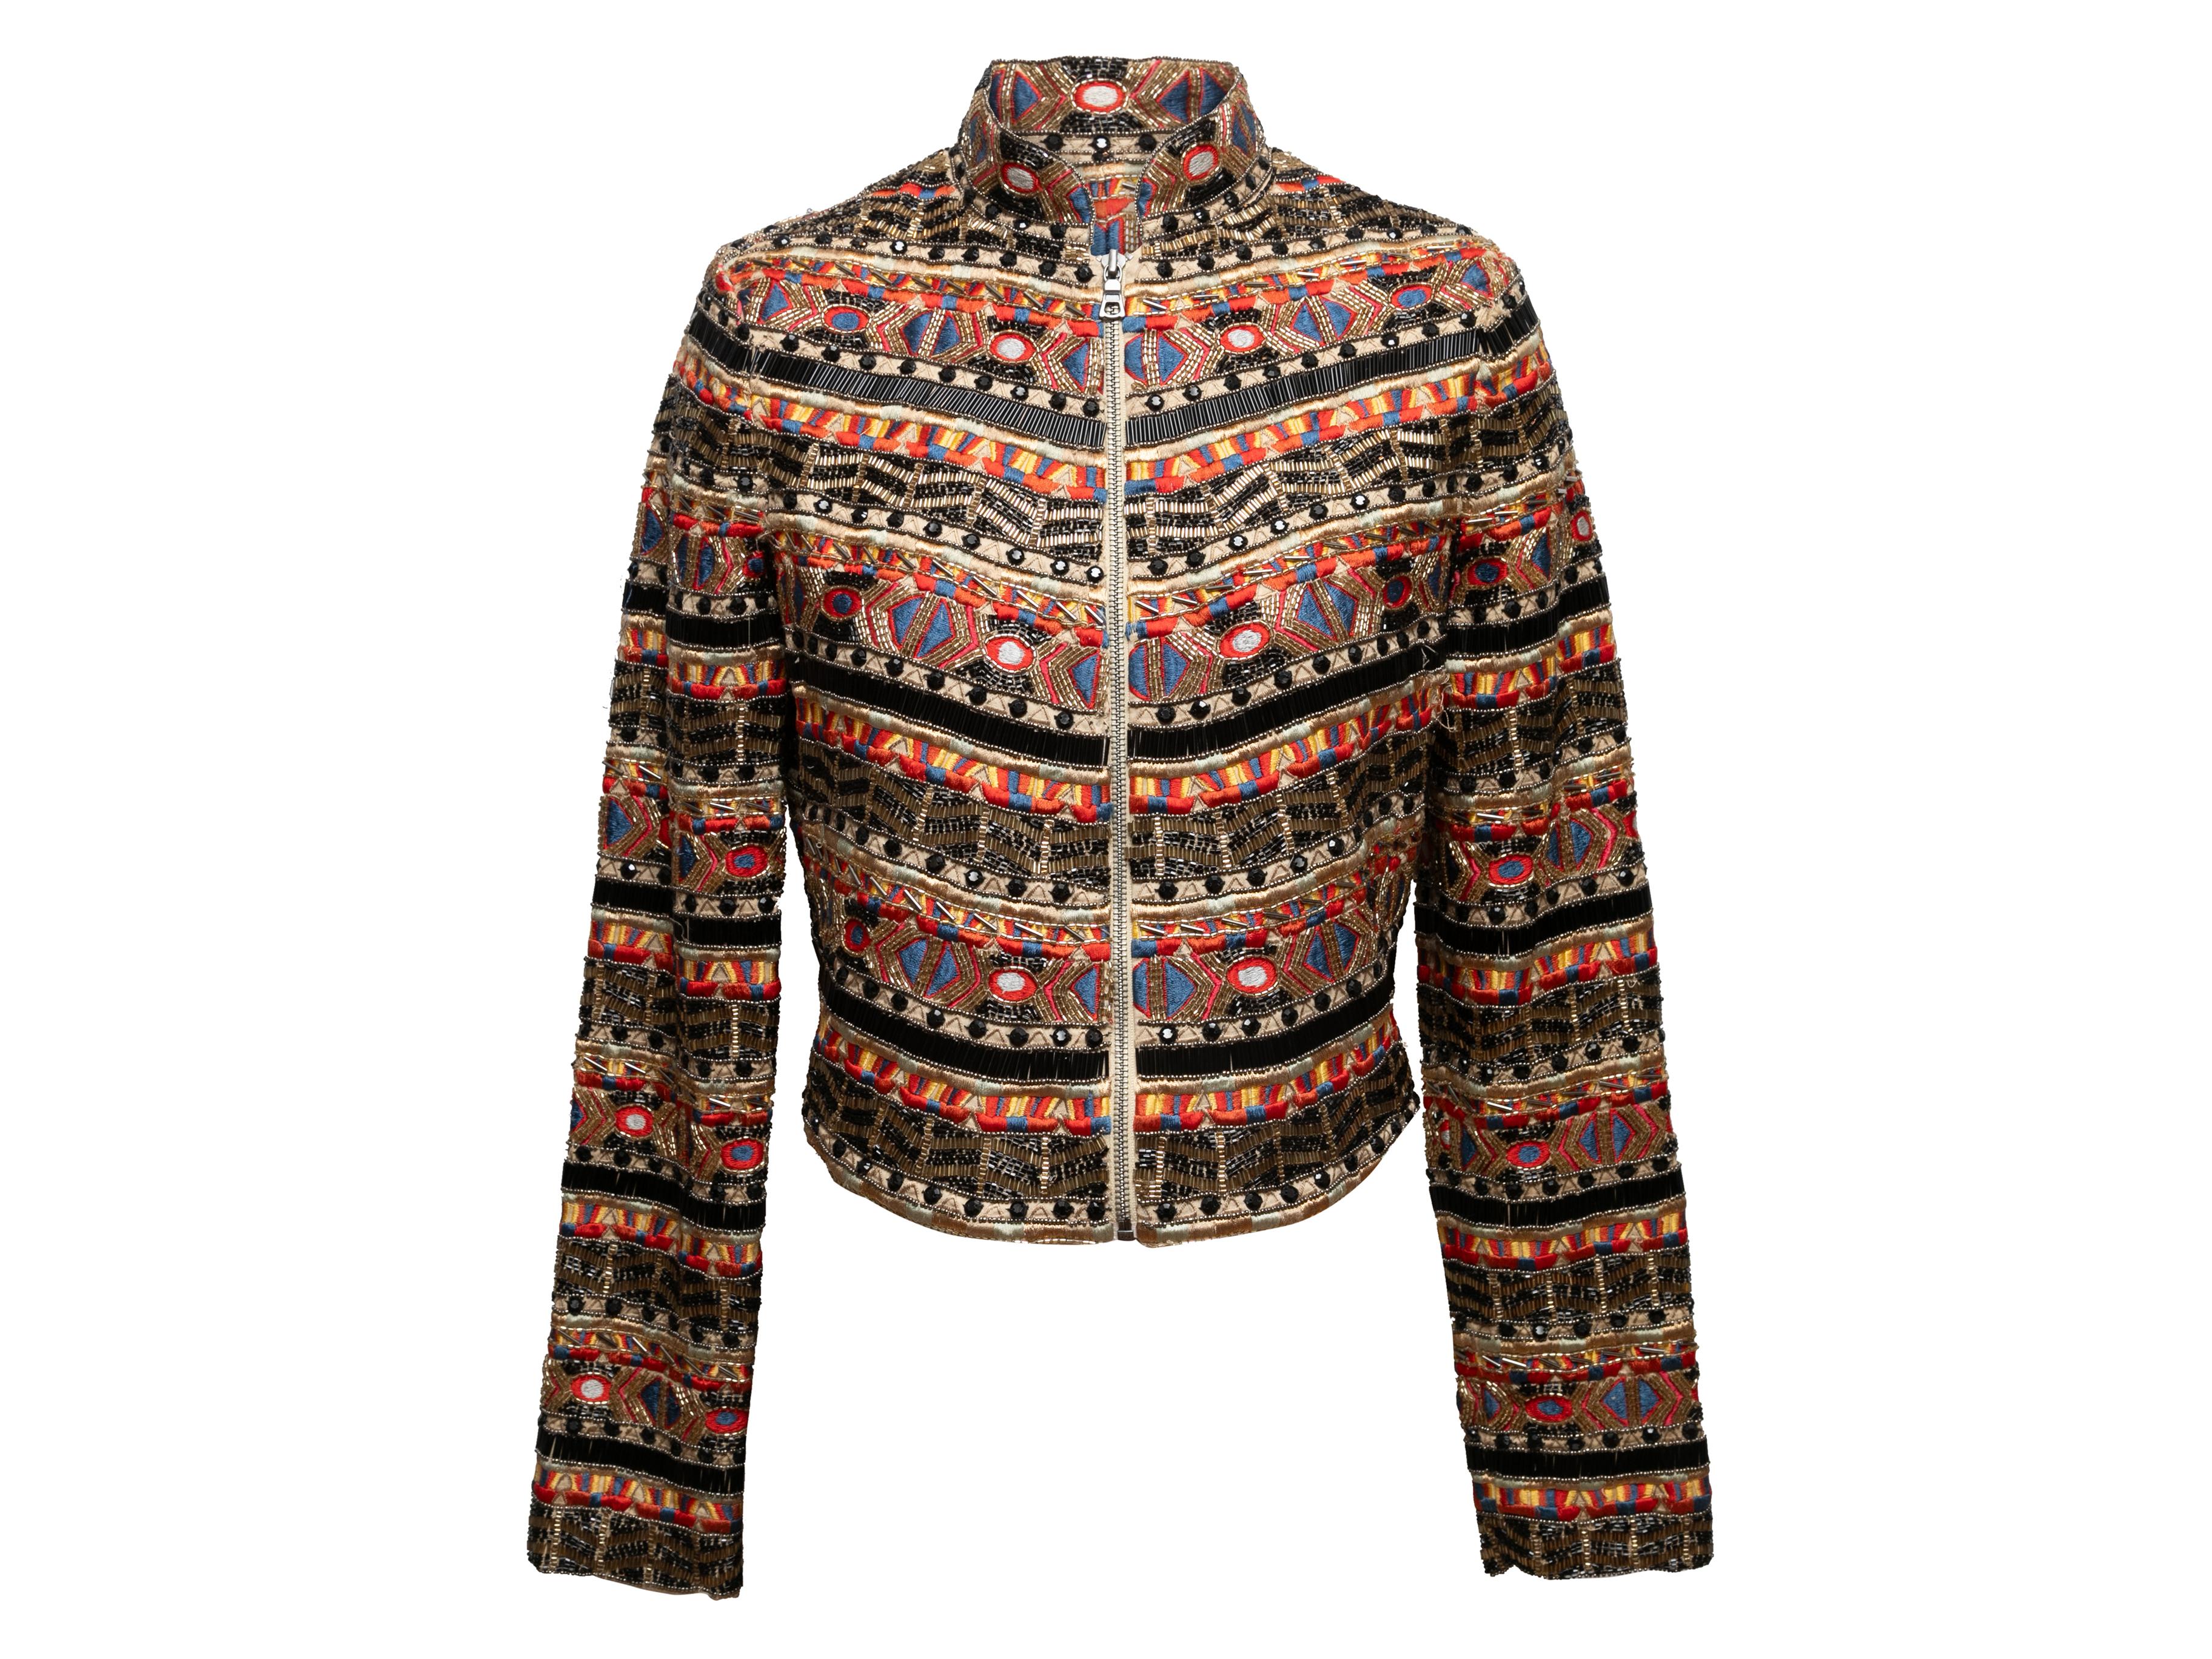 Tan and multicolor embroidered and bead-embellished jacket by Alice + Olivia. Stand collar. Zip closure at center front. 32